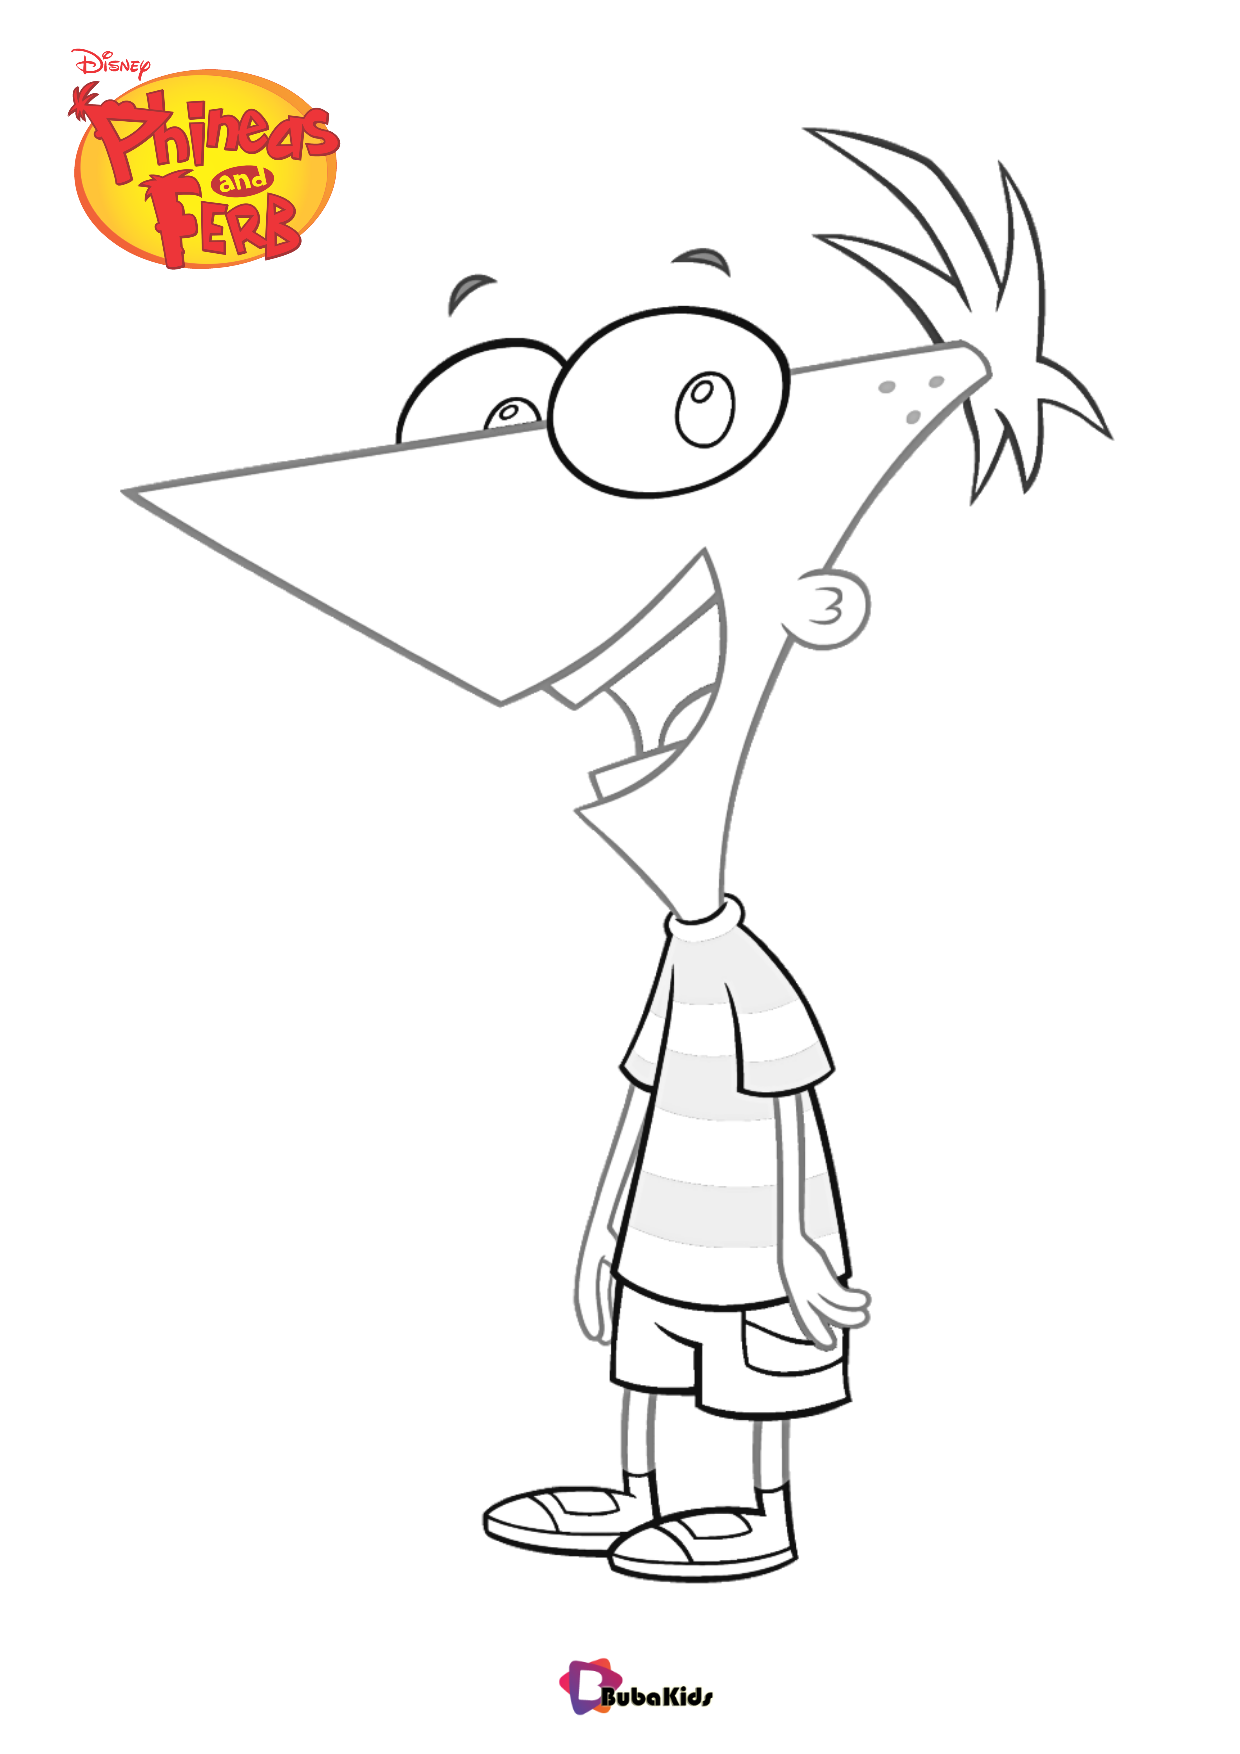 Phineas and Ferb coloring pages Wallpaper